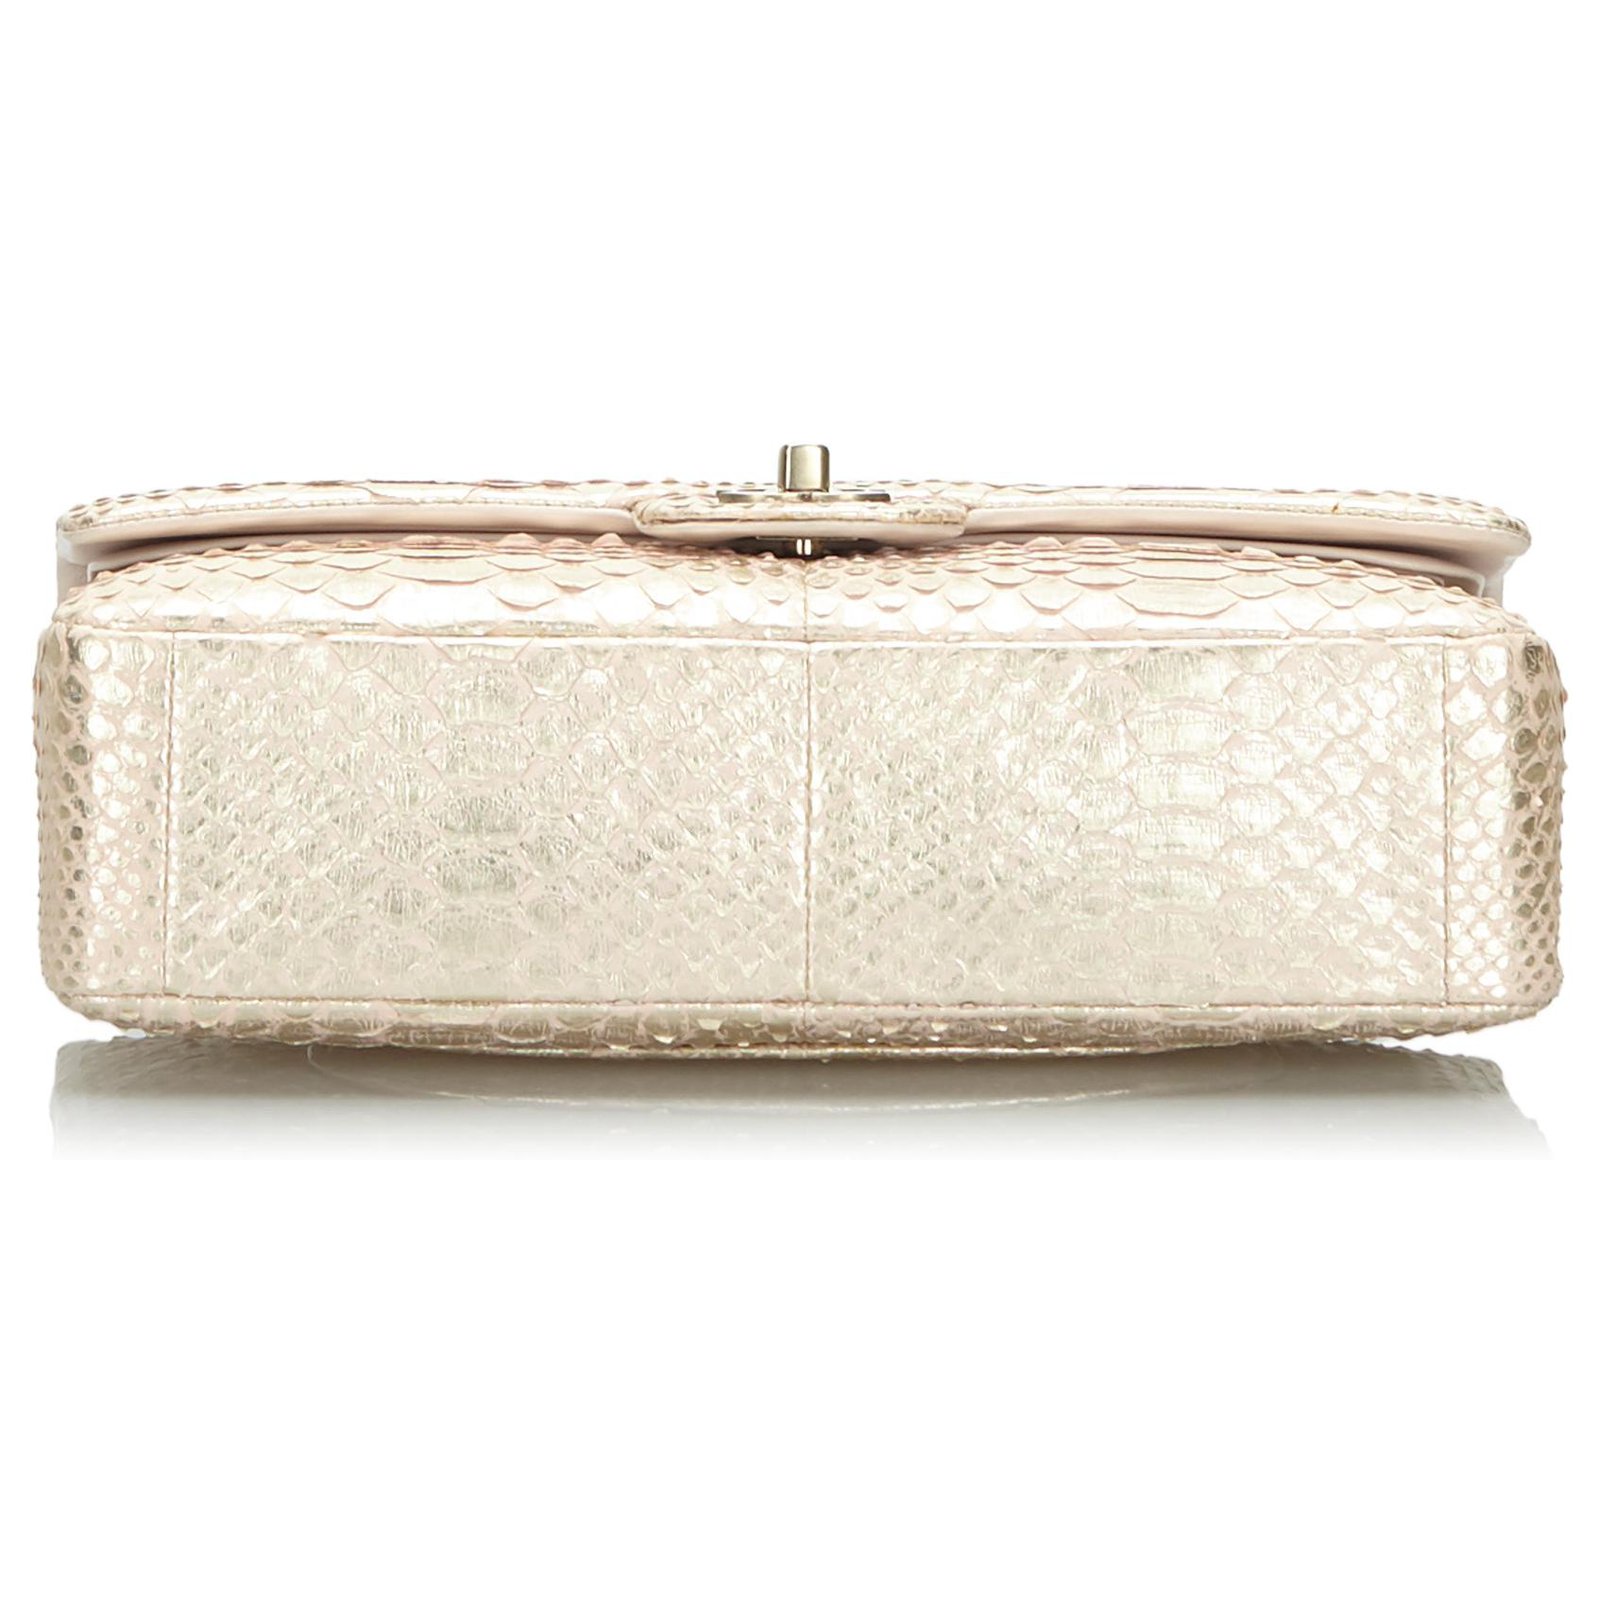 Chanel Bag Classic Single Flap Gold Python Leather with Gold Hardware –  Exquisite Artichoke